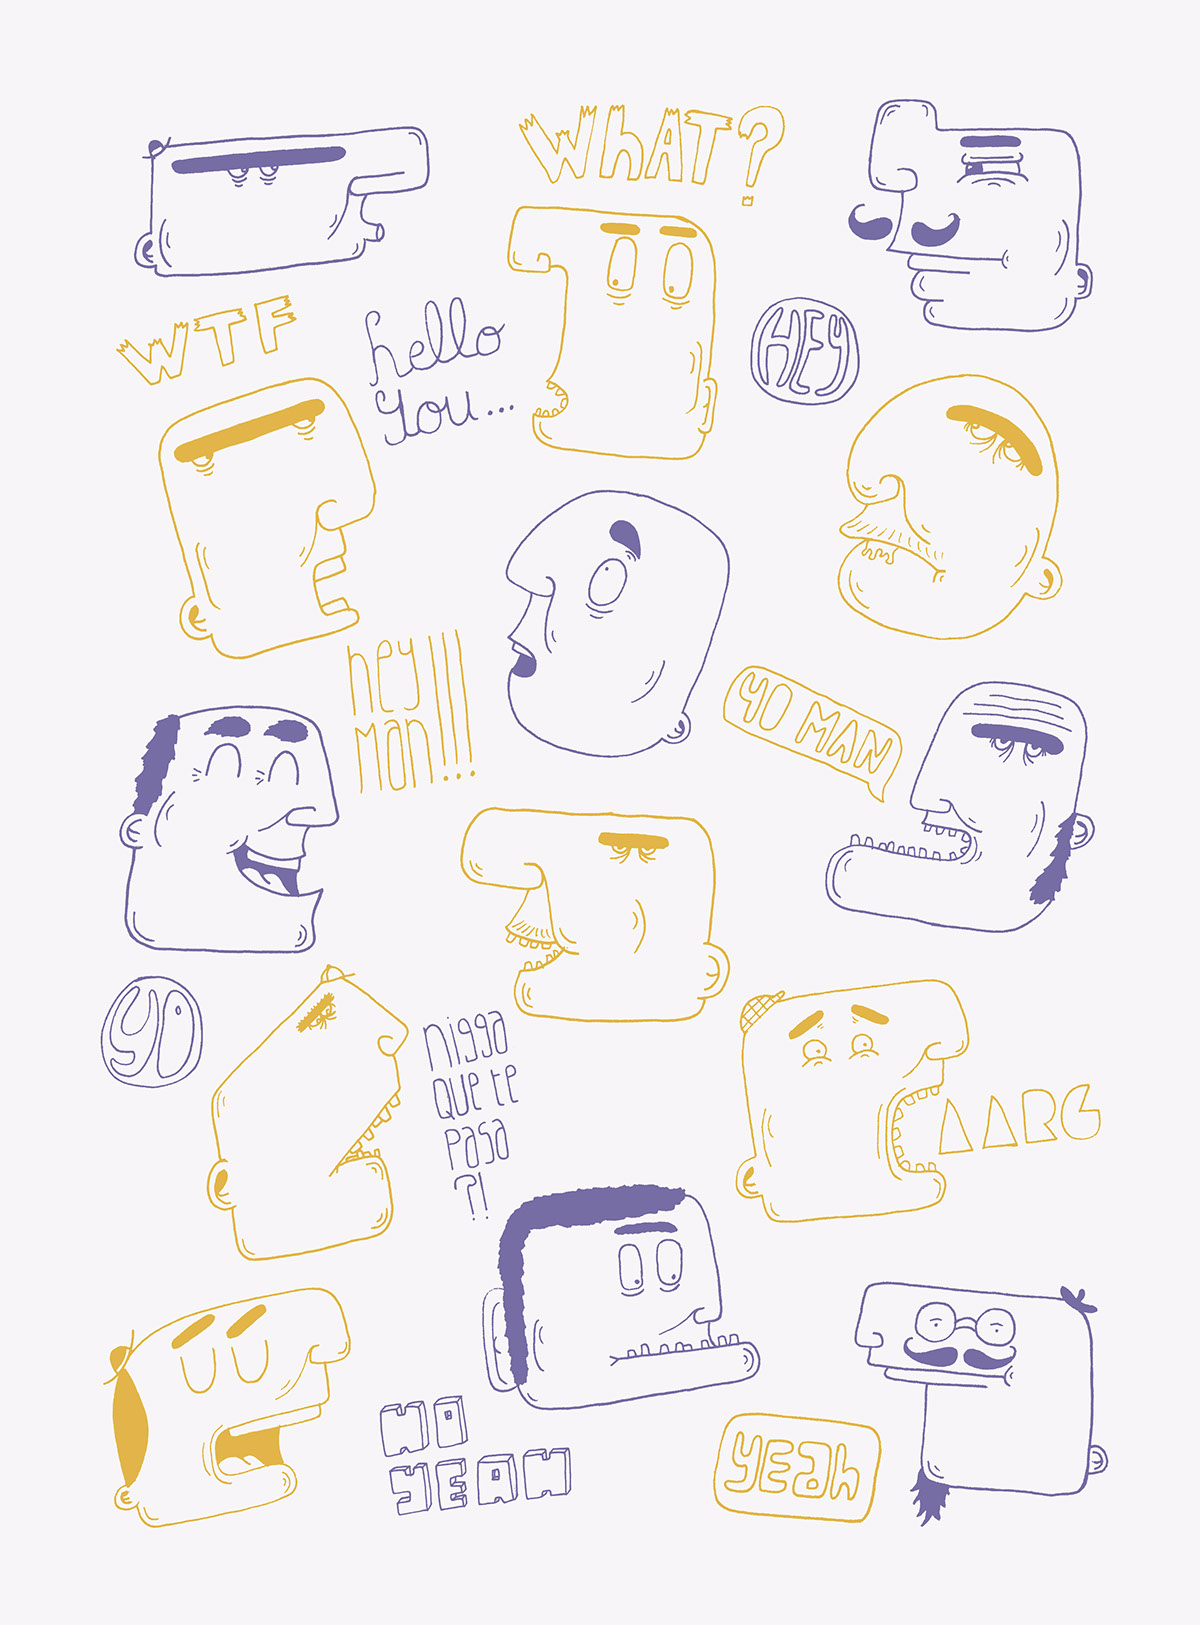 pattern design ipod design wall characters doodle perso funny strange weird typo tipografia Fun